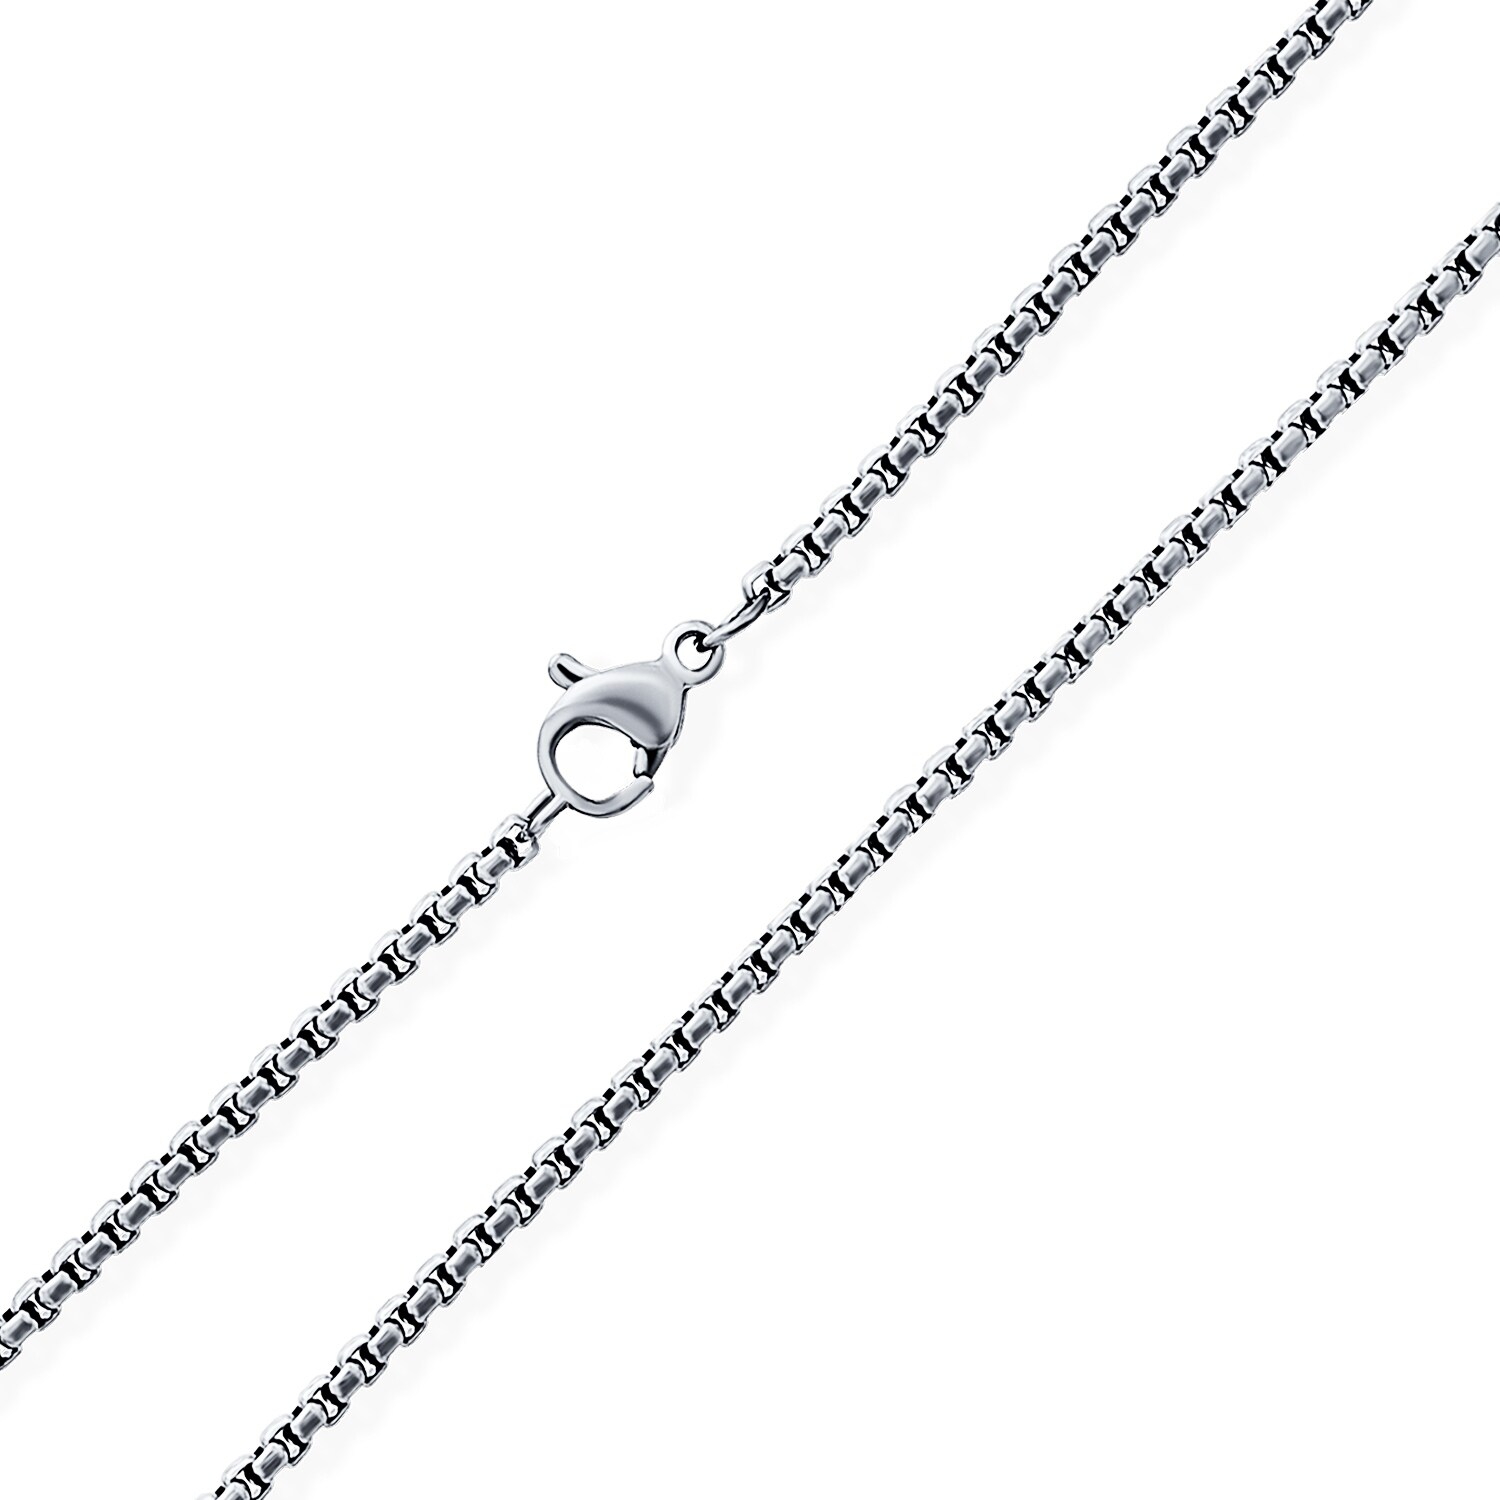 Box Link Chain Necklace 2MM Rose Gold Plated Silver Stainless Steel